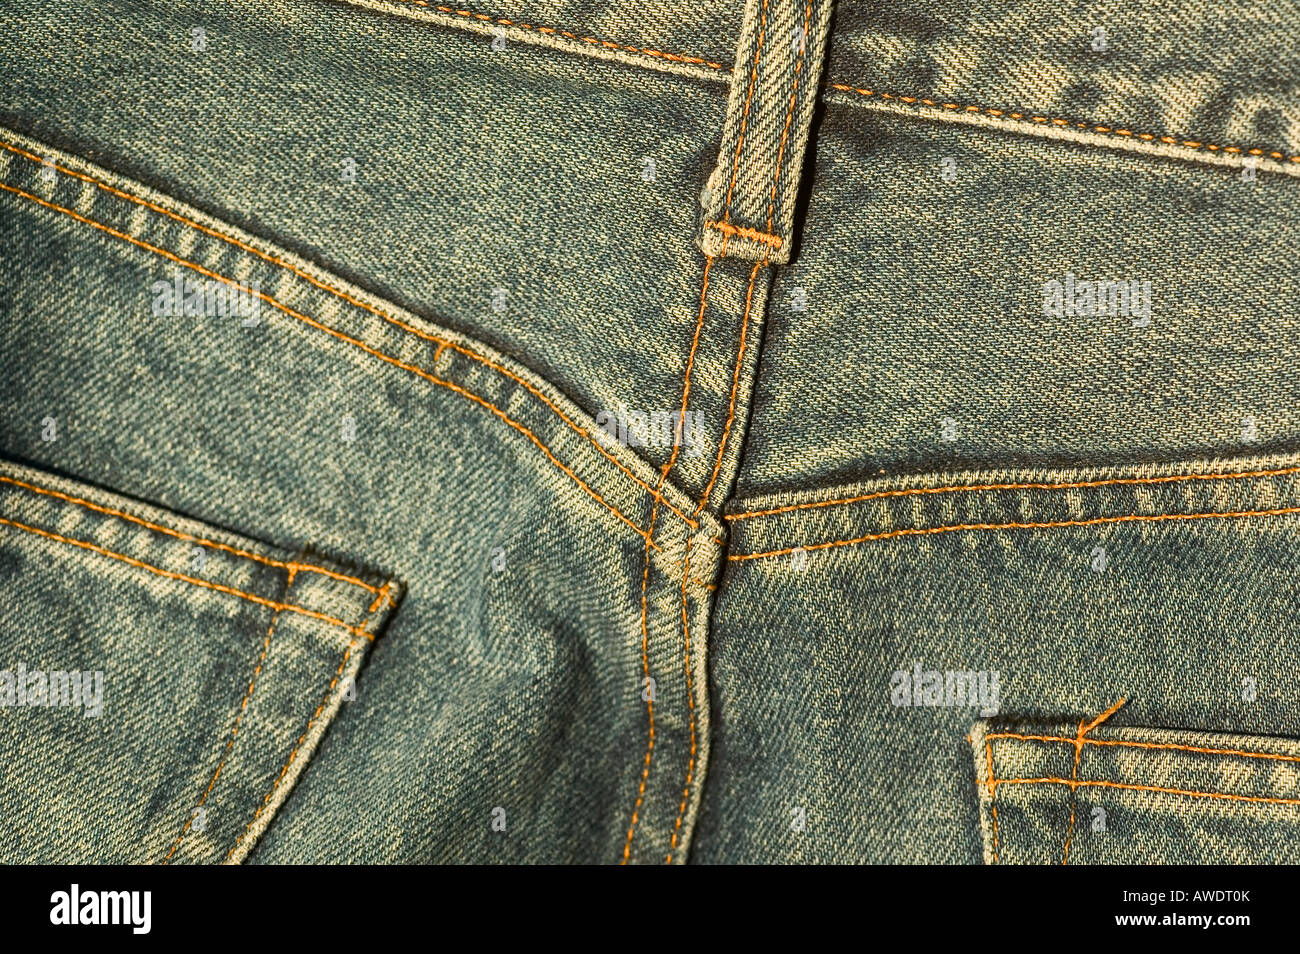 Jeans blue fashion texture back fabric cloth pants pocket design pattern  style close up old slothes grunge new trousers surface Stock Photo - Alamy